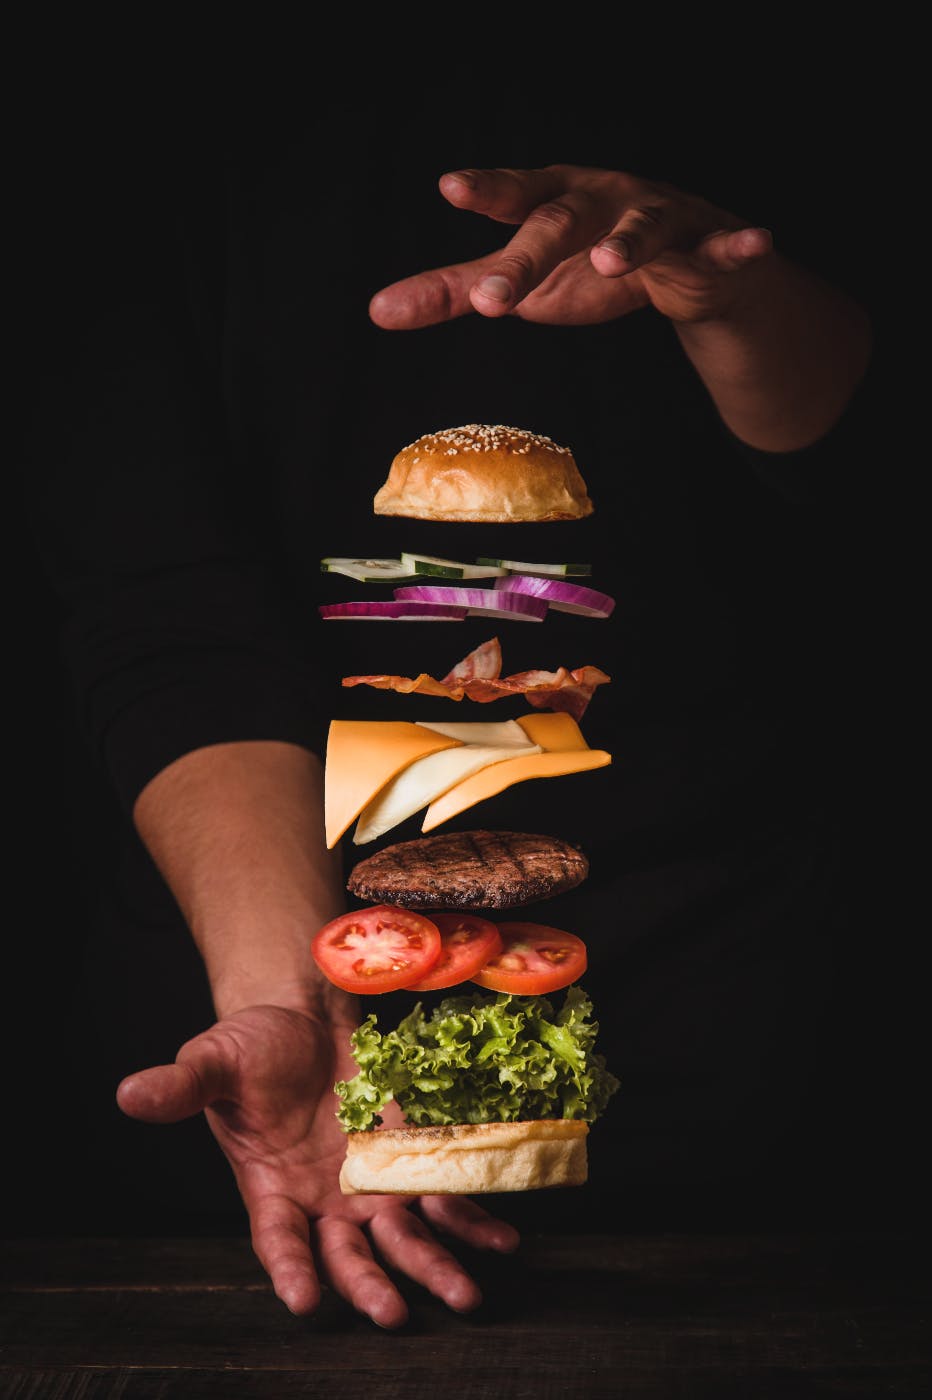 a stop motion image of a burger with all the fixings coming together